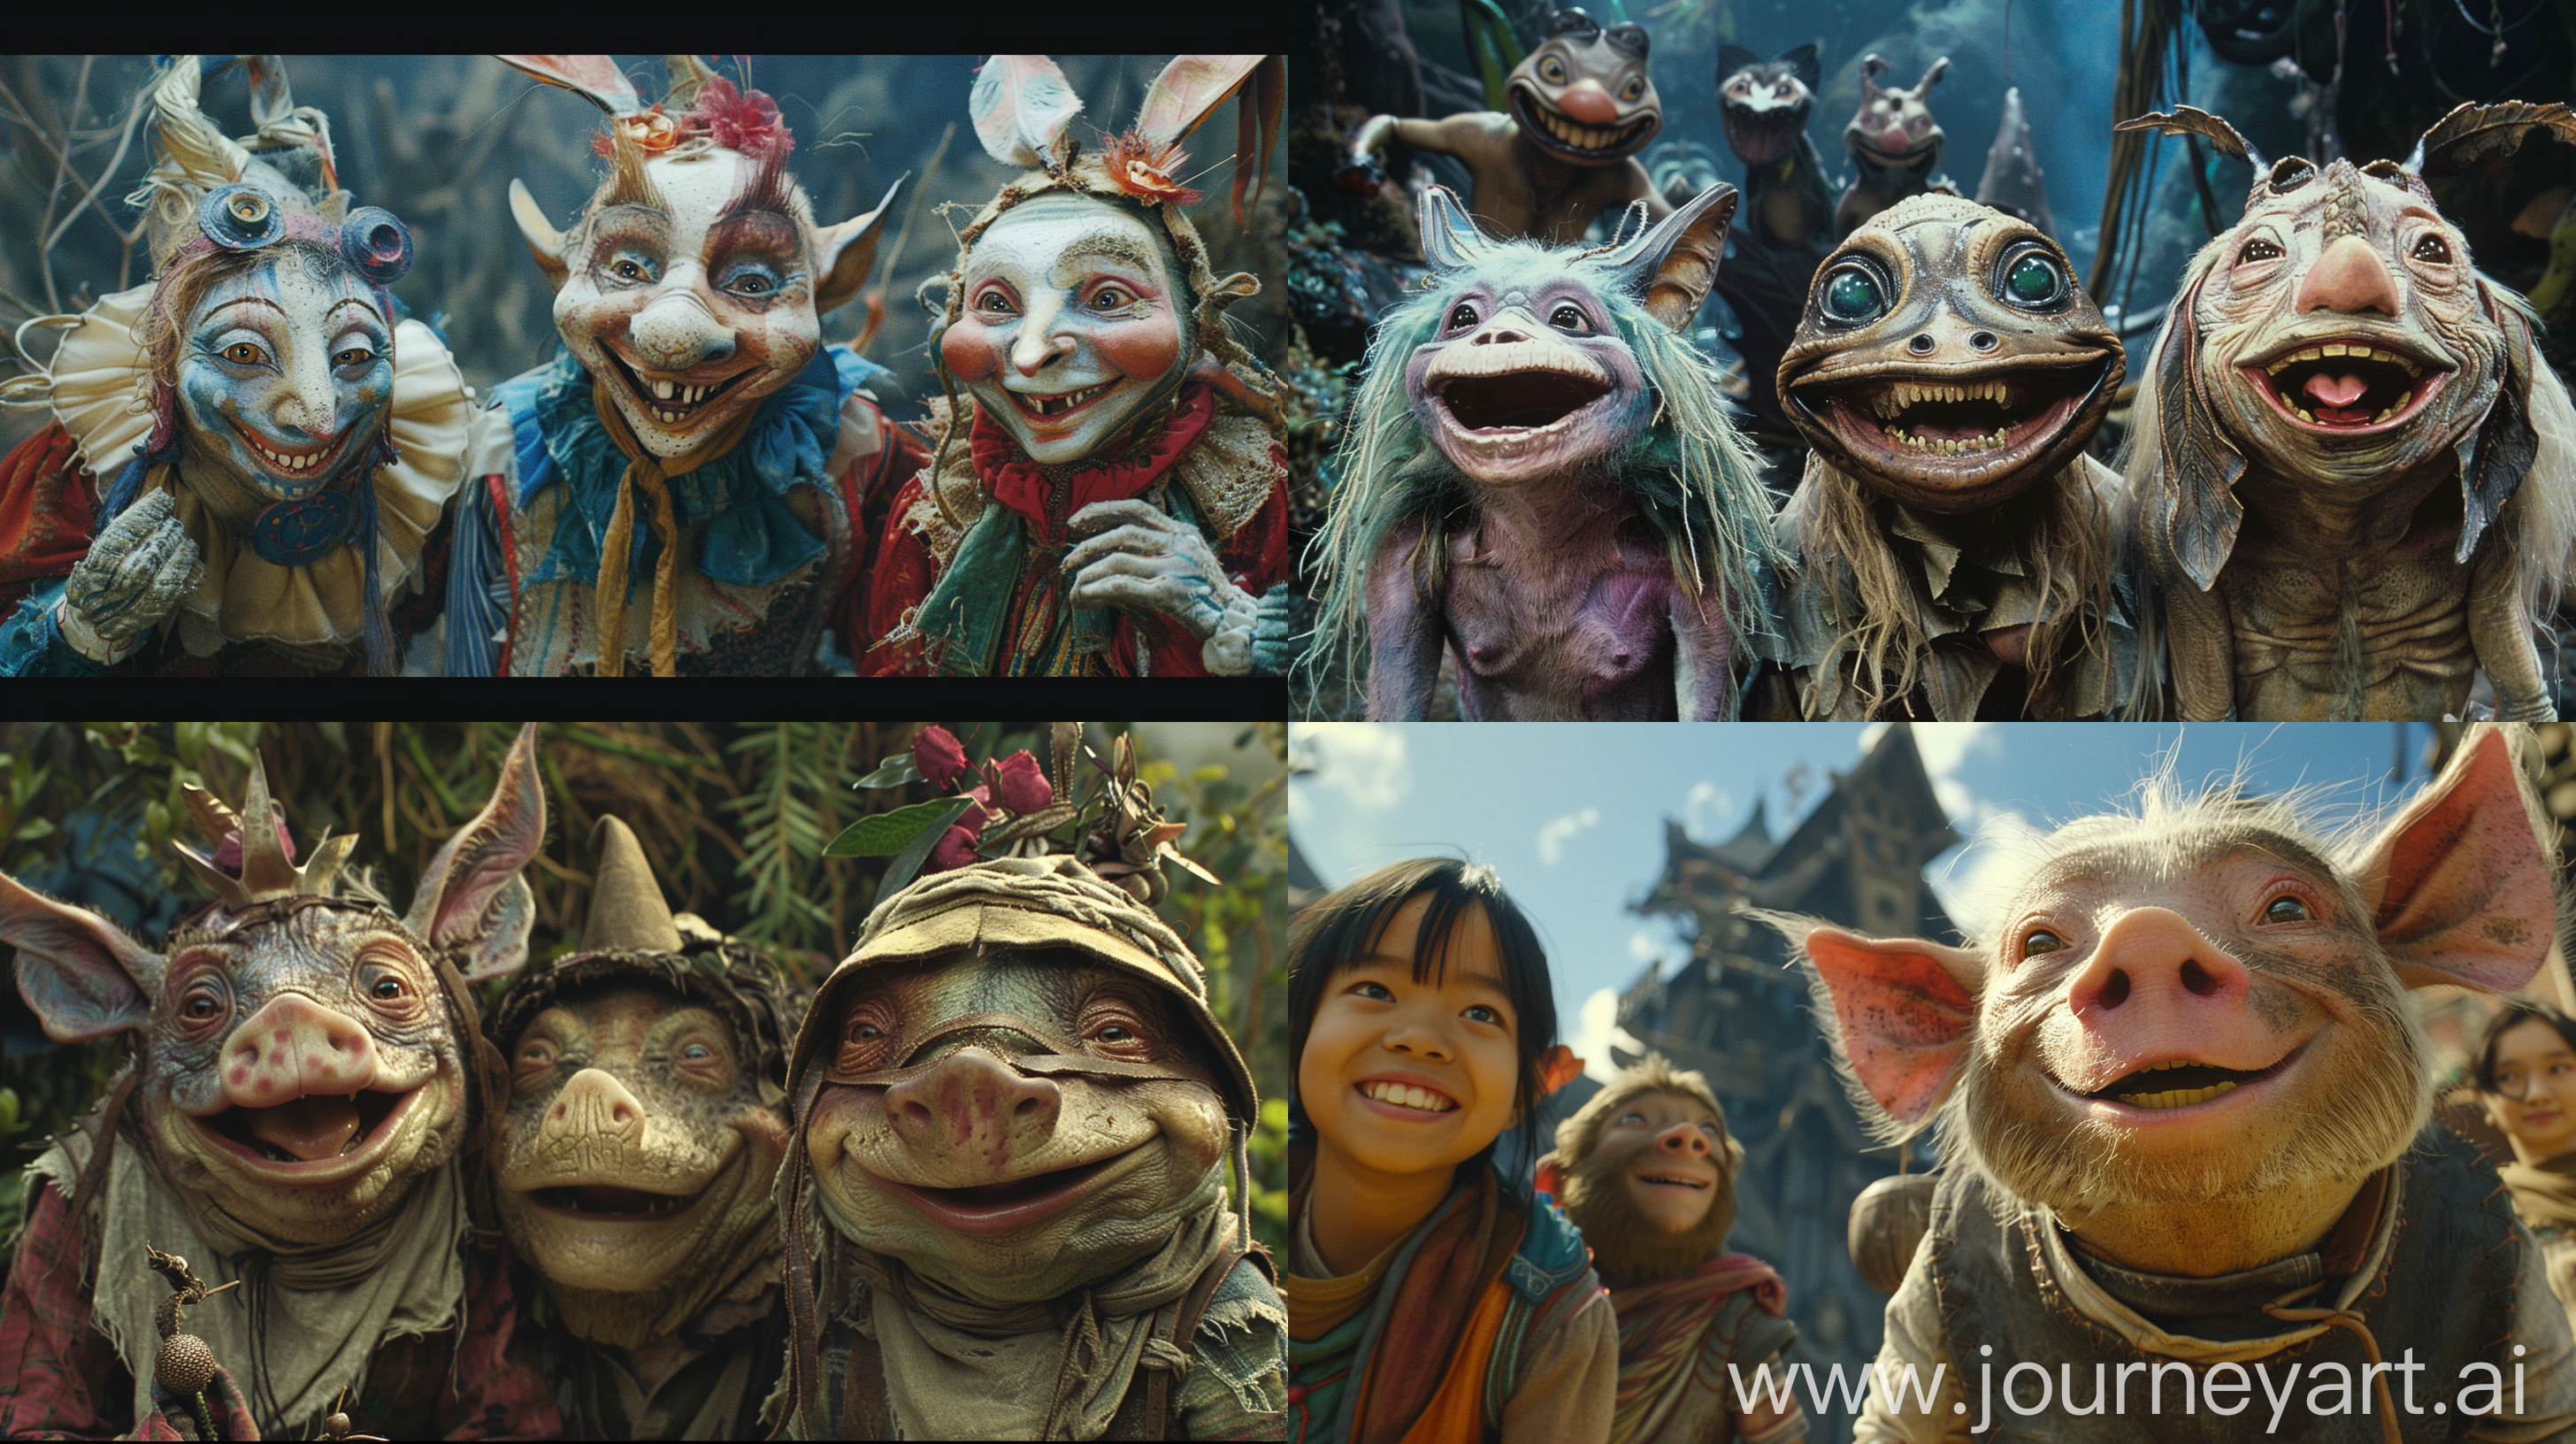 Cinematic film still of happy anamorphic characters from a fairytale movie that doesn't exist if it was, made in the style of Jean Giraud (Moebius)::  illustration, cartoon::-0.8 photo::0.8  --v 6.0 --style raw --ar 16:9 --s 130